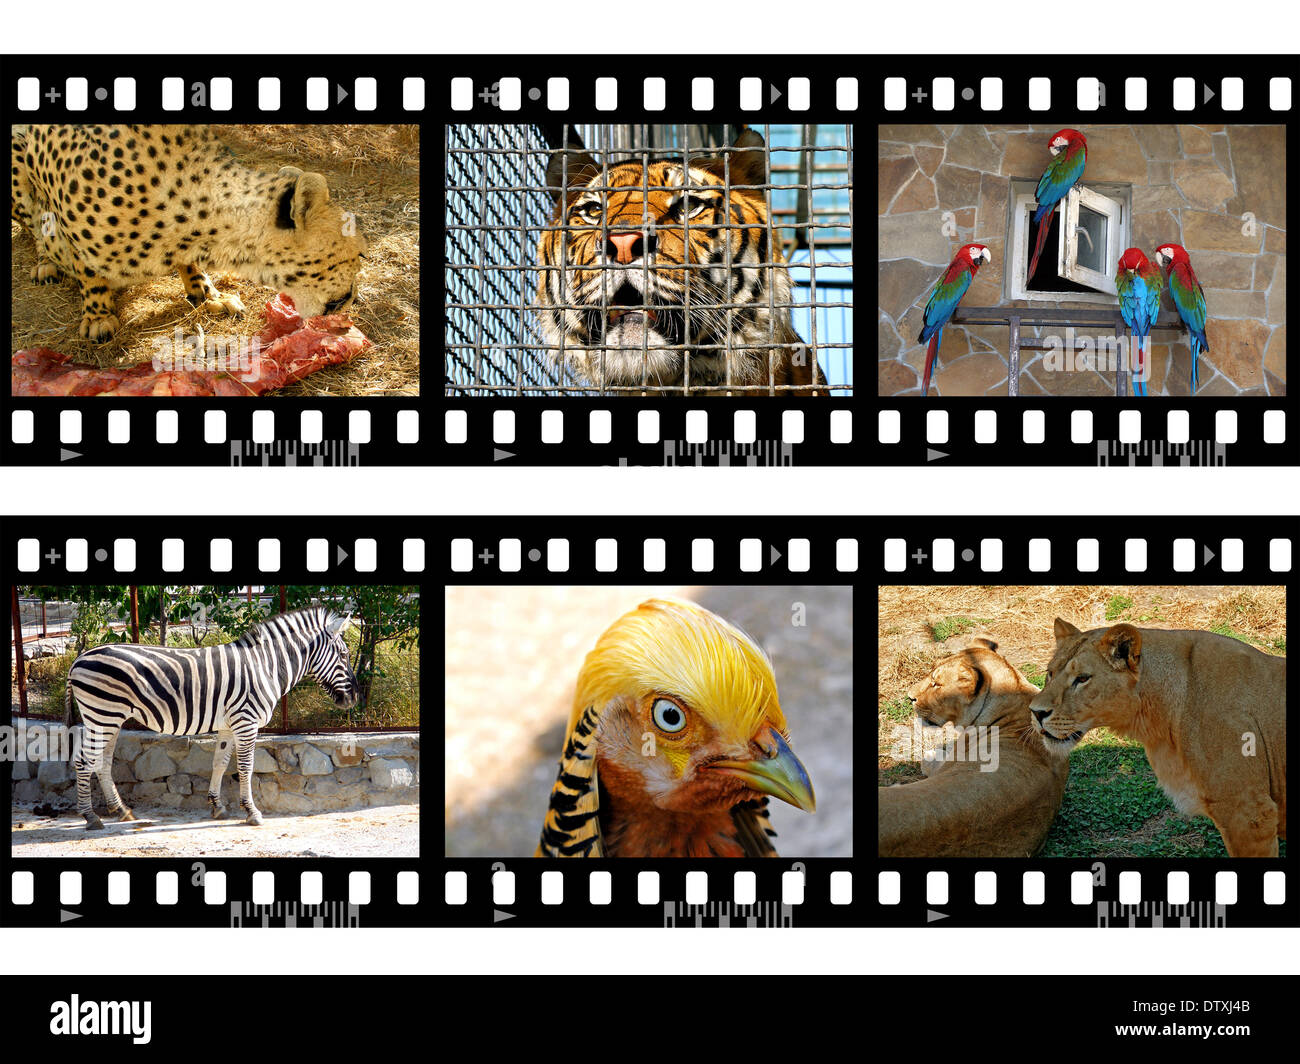 Animals in frames of film Stock Photo